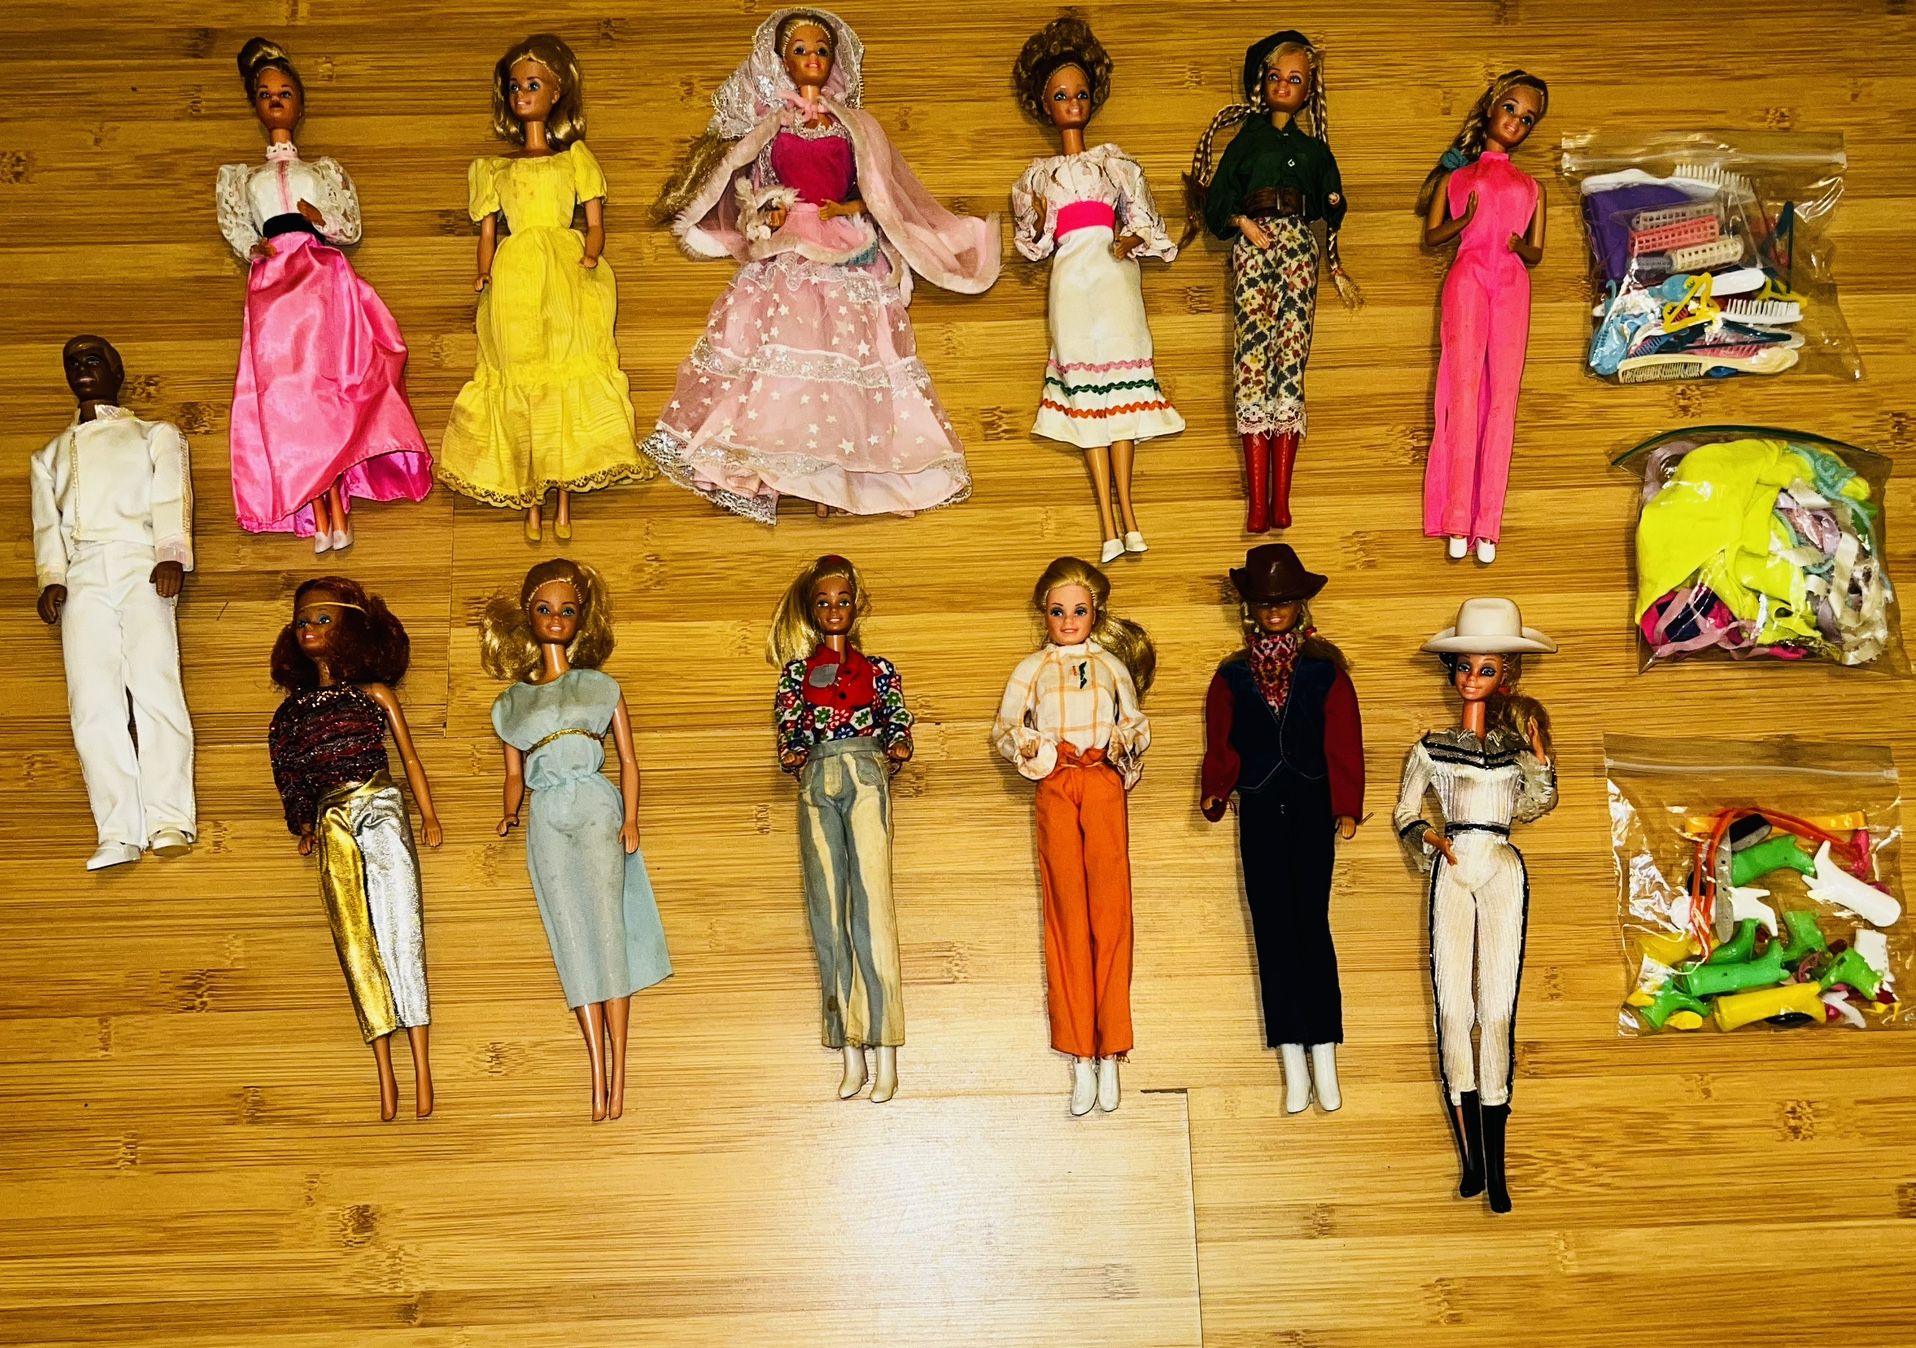 12  80’s  Barbie Dolls And 1 Ken with Extra Clothes And Accessories 